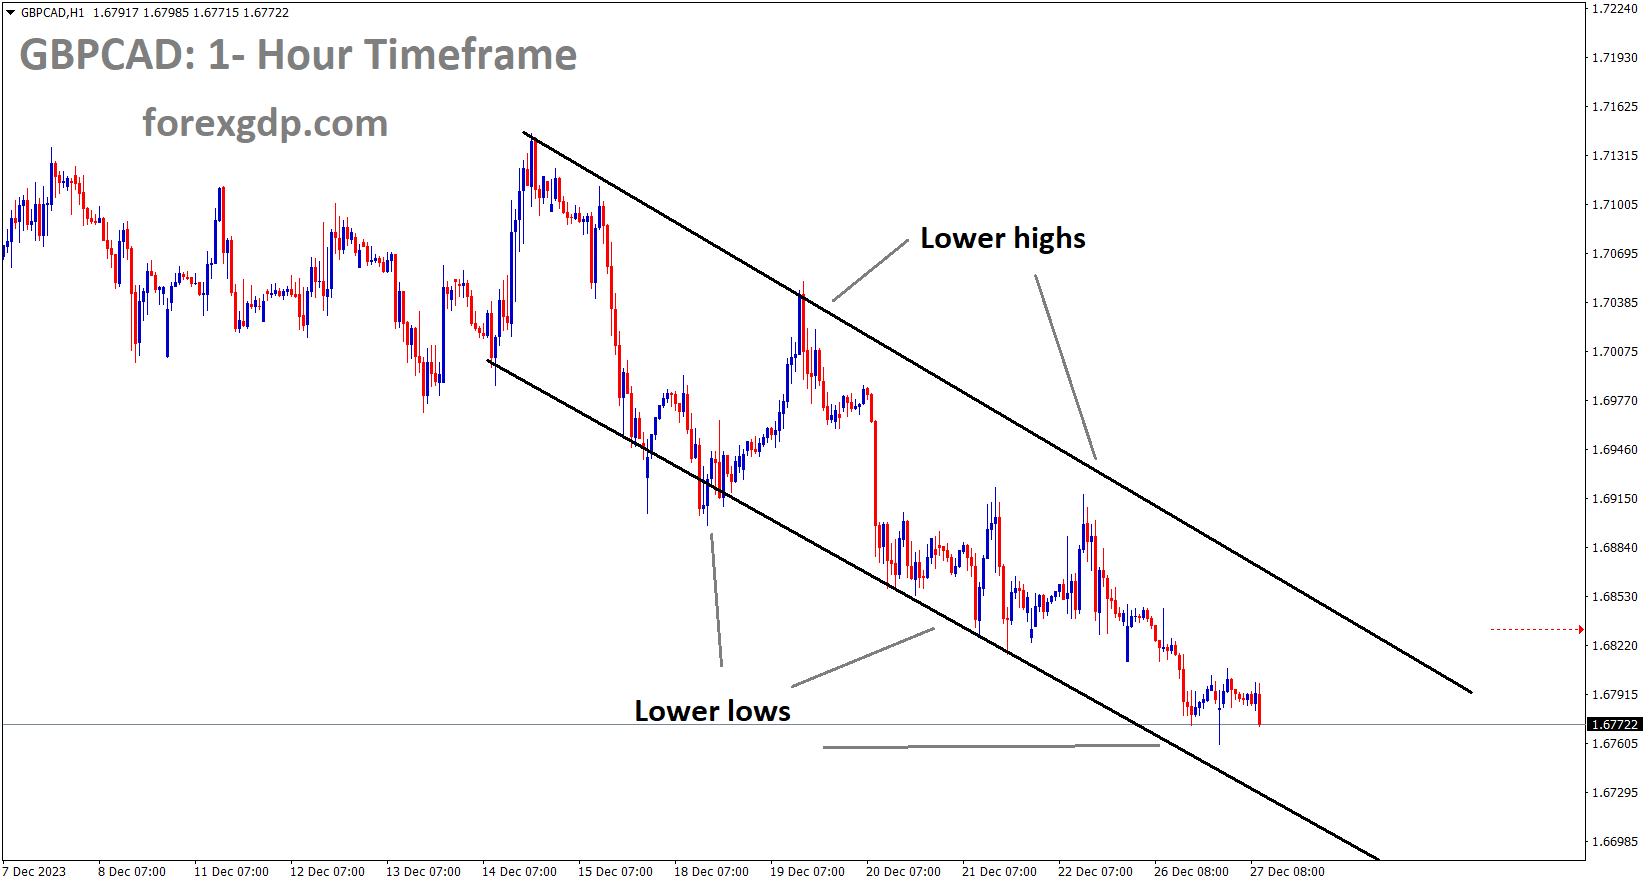 GBPCAD is moving in the Descending channel and the market has reached the lower low area of the channel